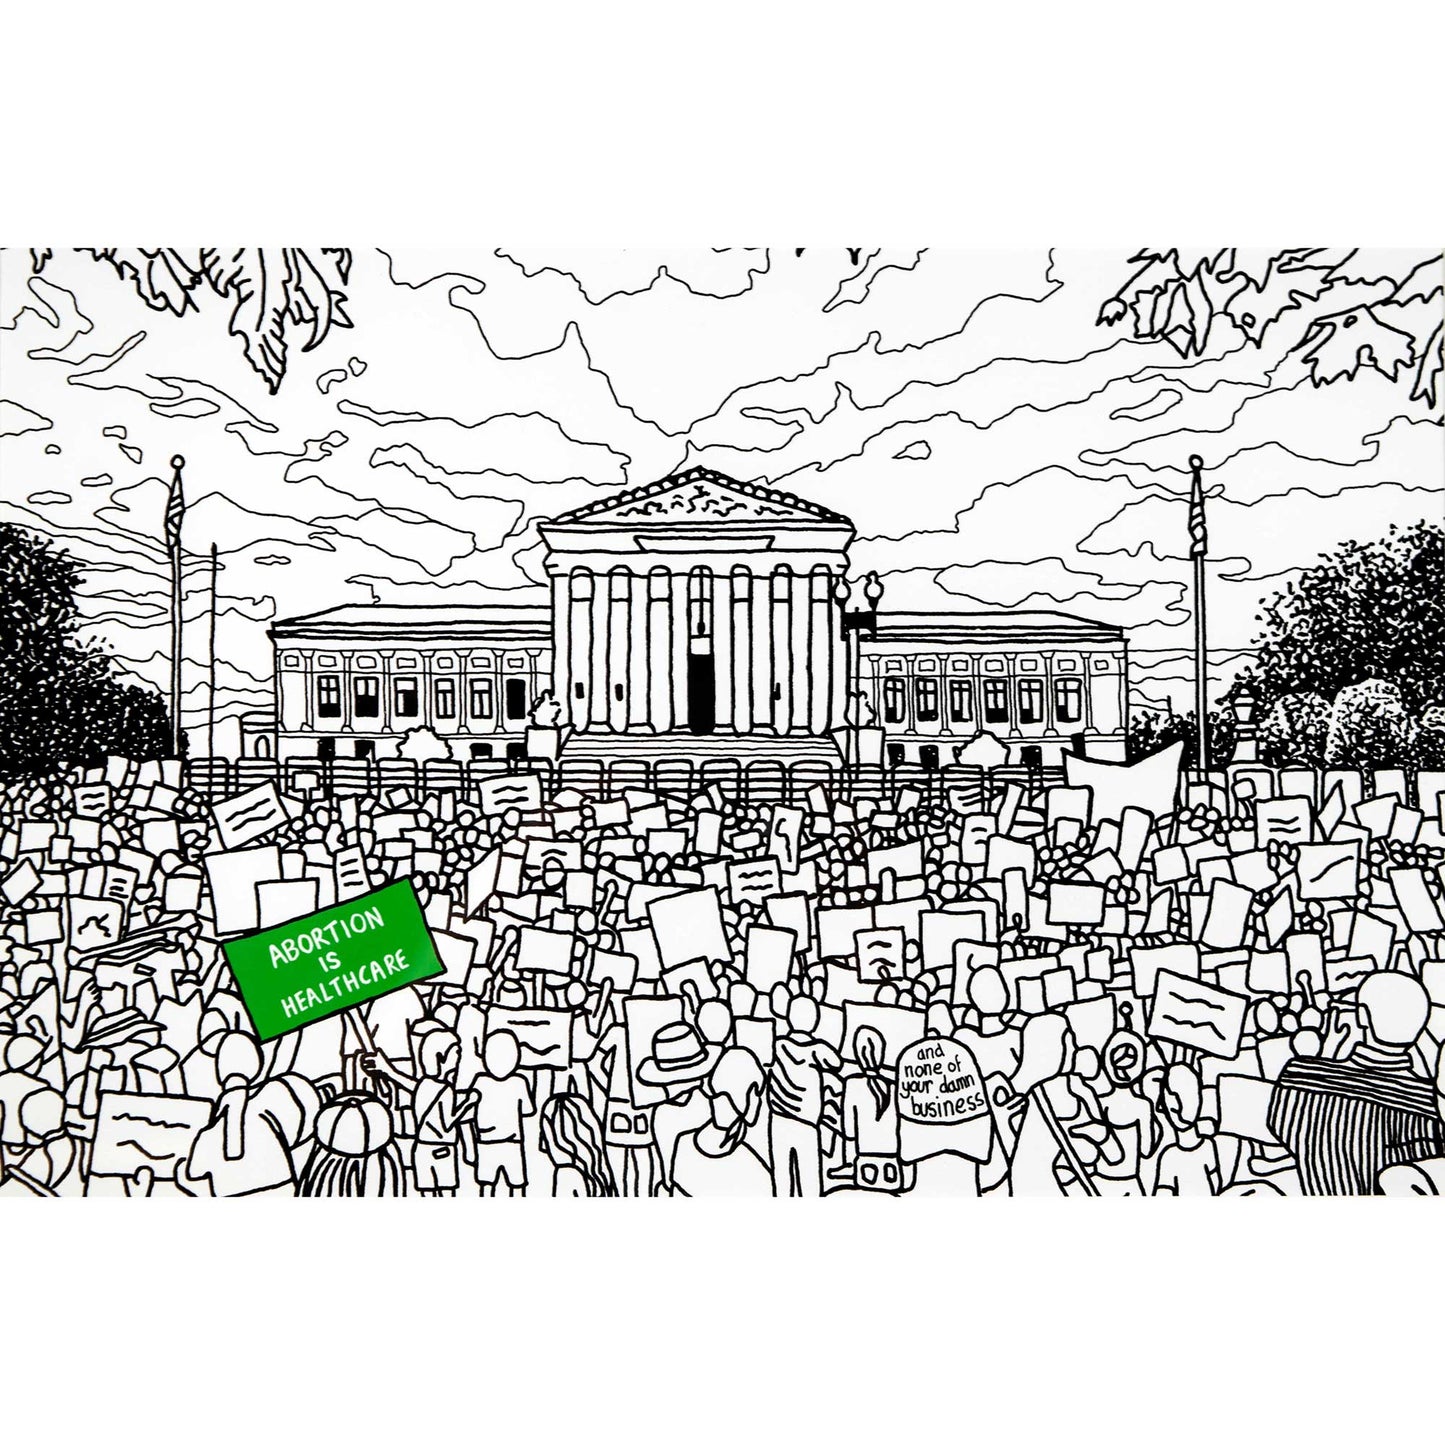 'Protest In Front of SCOTUS' Giclée Art Print